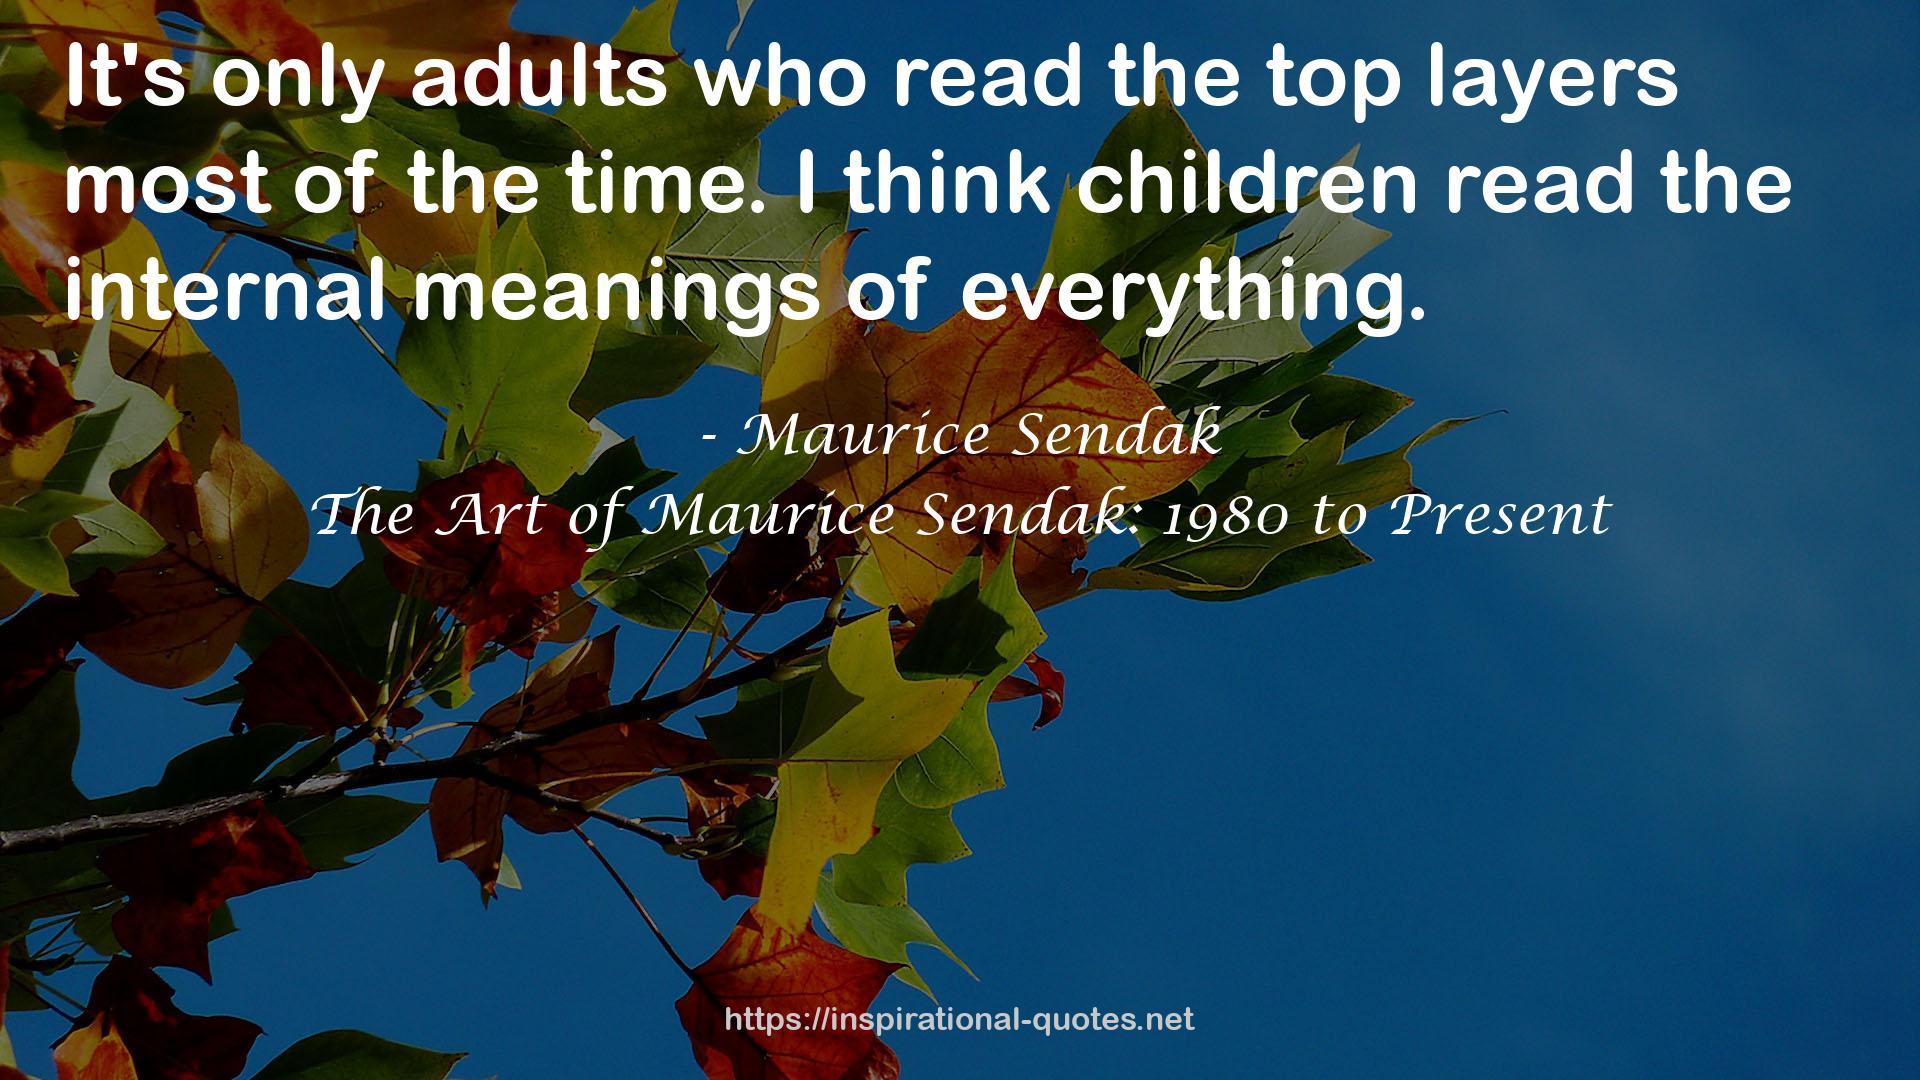 The Art of Maurice Sendak: 1980 to Present QUOTES